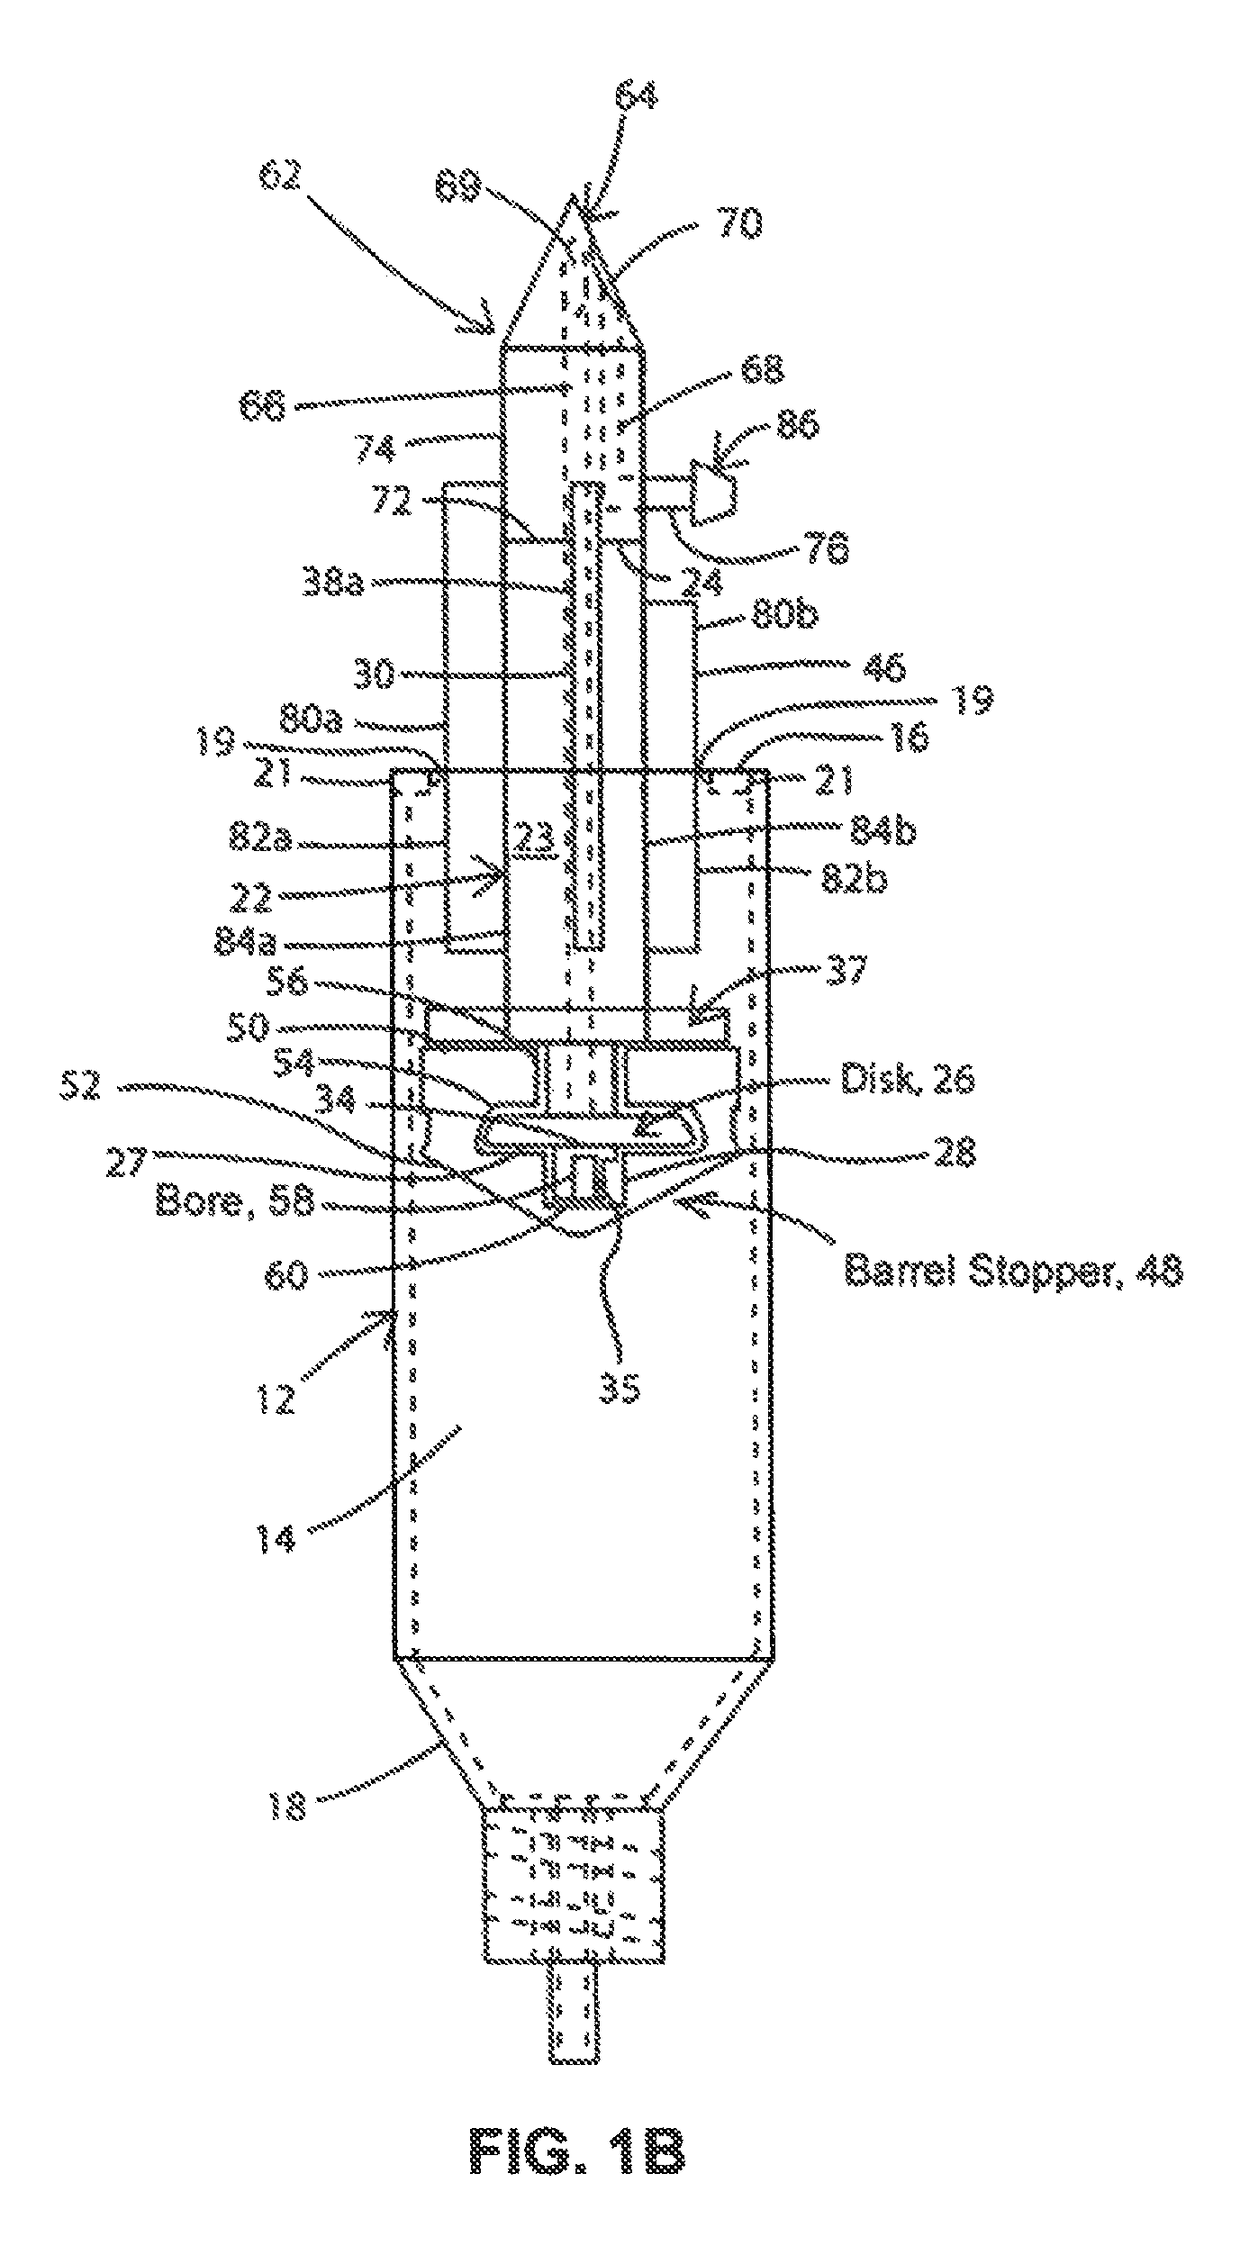 Syringe apparatus for transferring liquids into and out of a vial having a septum